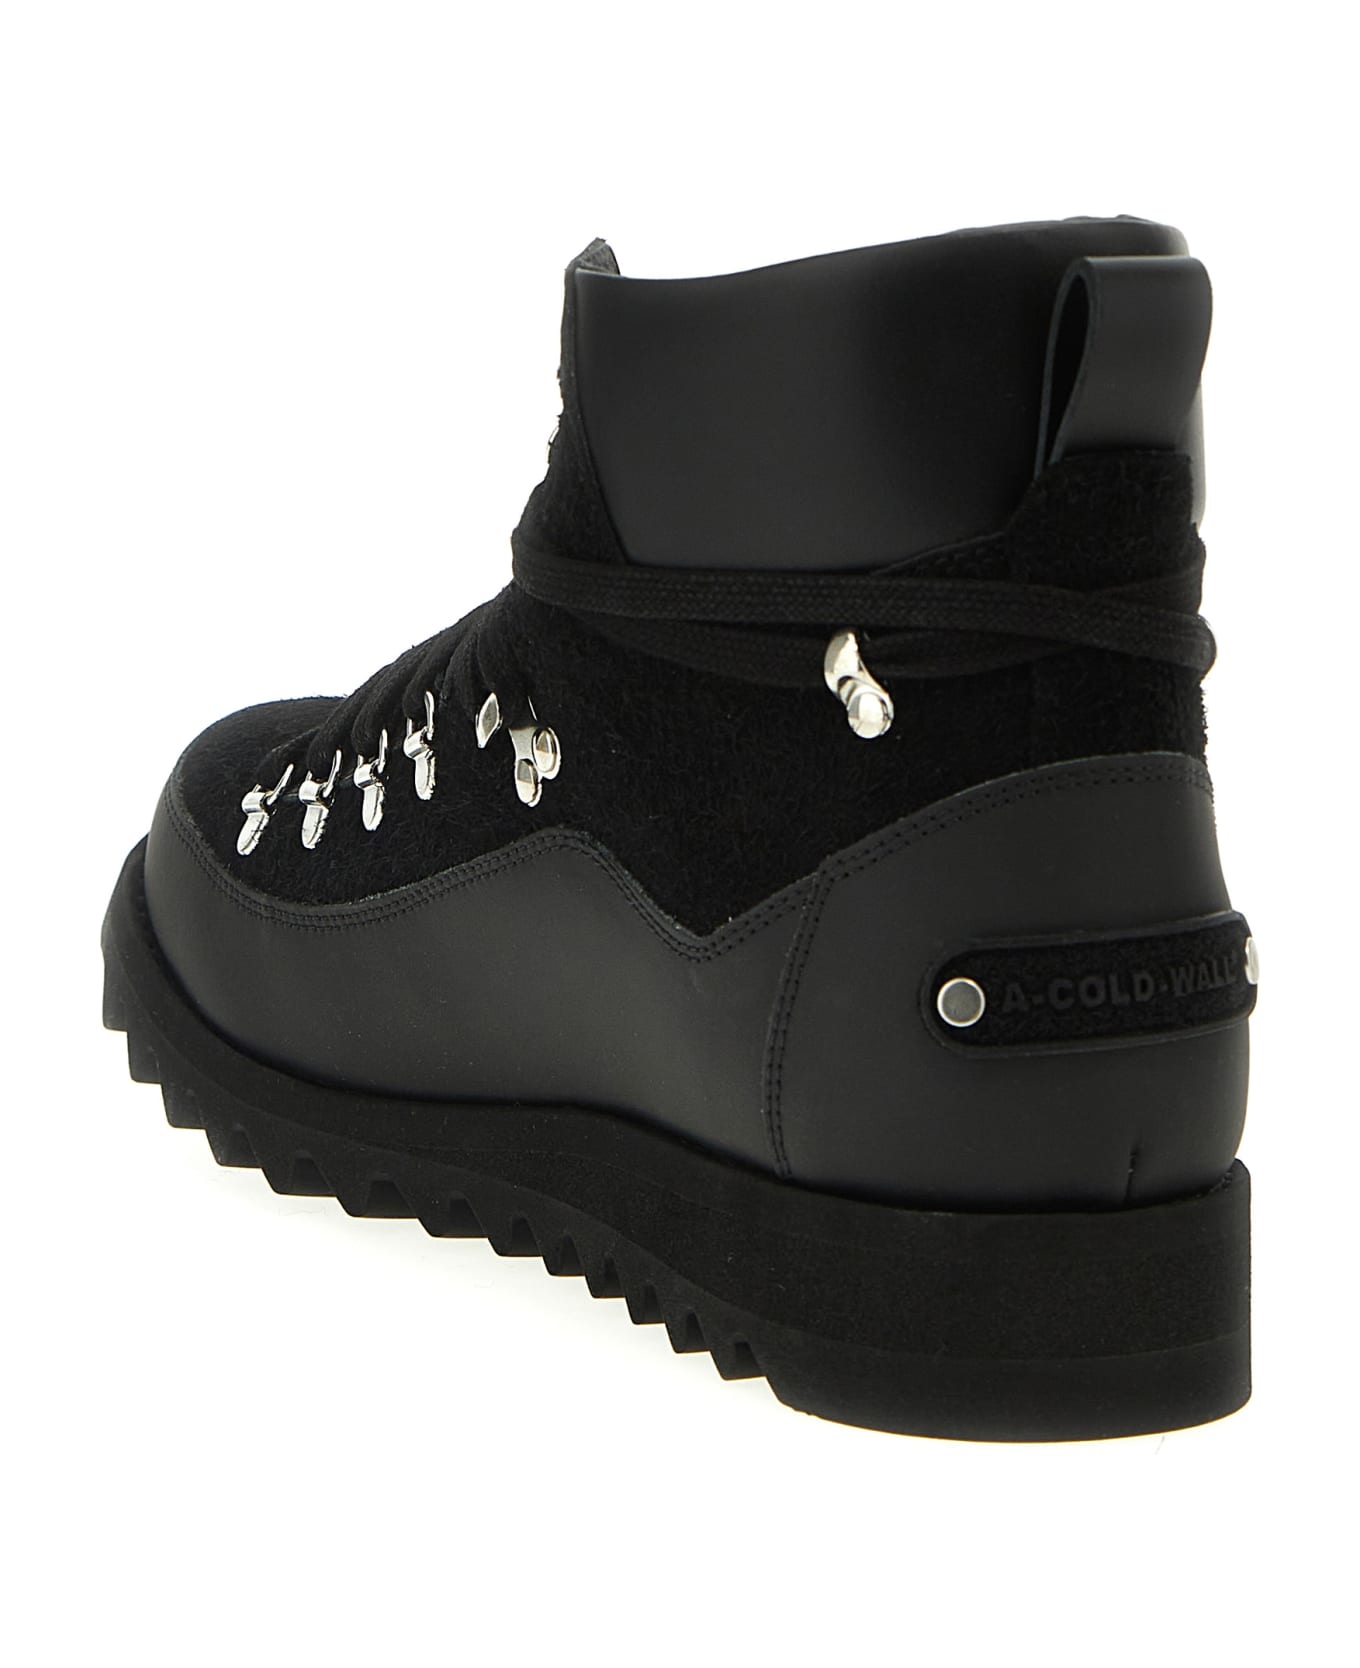 A-COLD-WALL 'alpine' Ankle Boots - Black   ブーツ